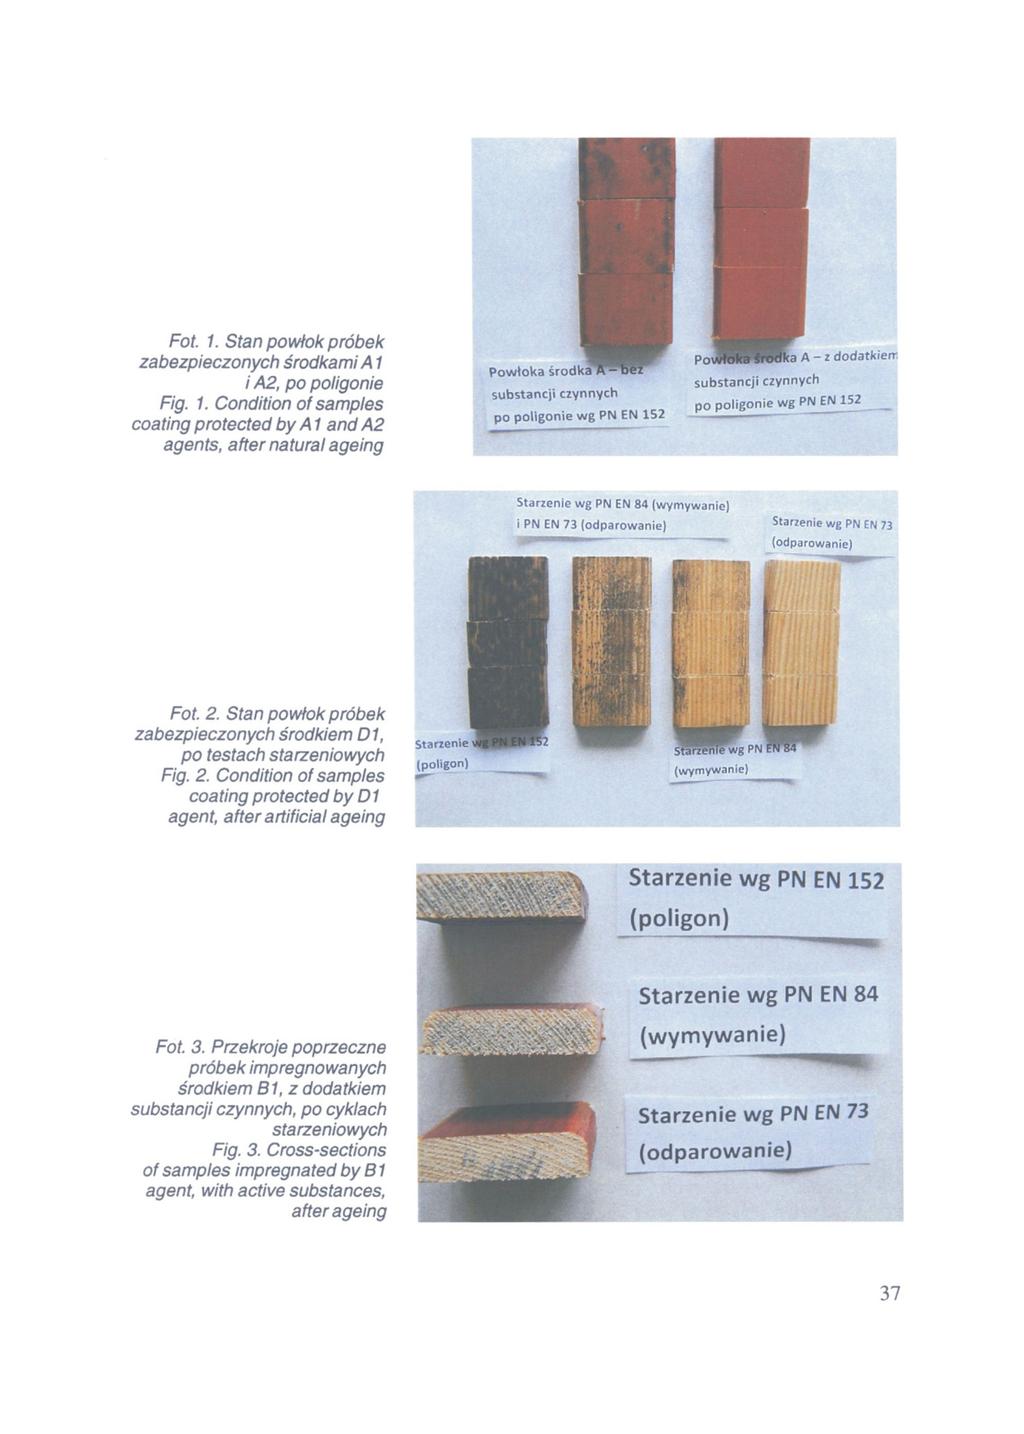 Fot. 1. Stan powłok próbek zabezpieczonych środkami A1 i A2, po poligonie Fig. 1. Condition of samples coating protected by A1 and A2 agents, after natural ageing Fot. 2.